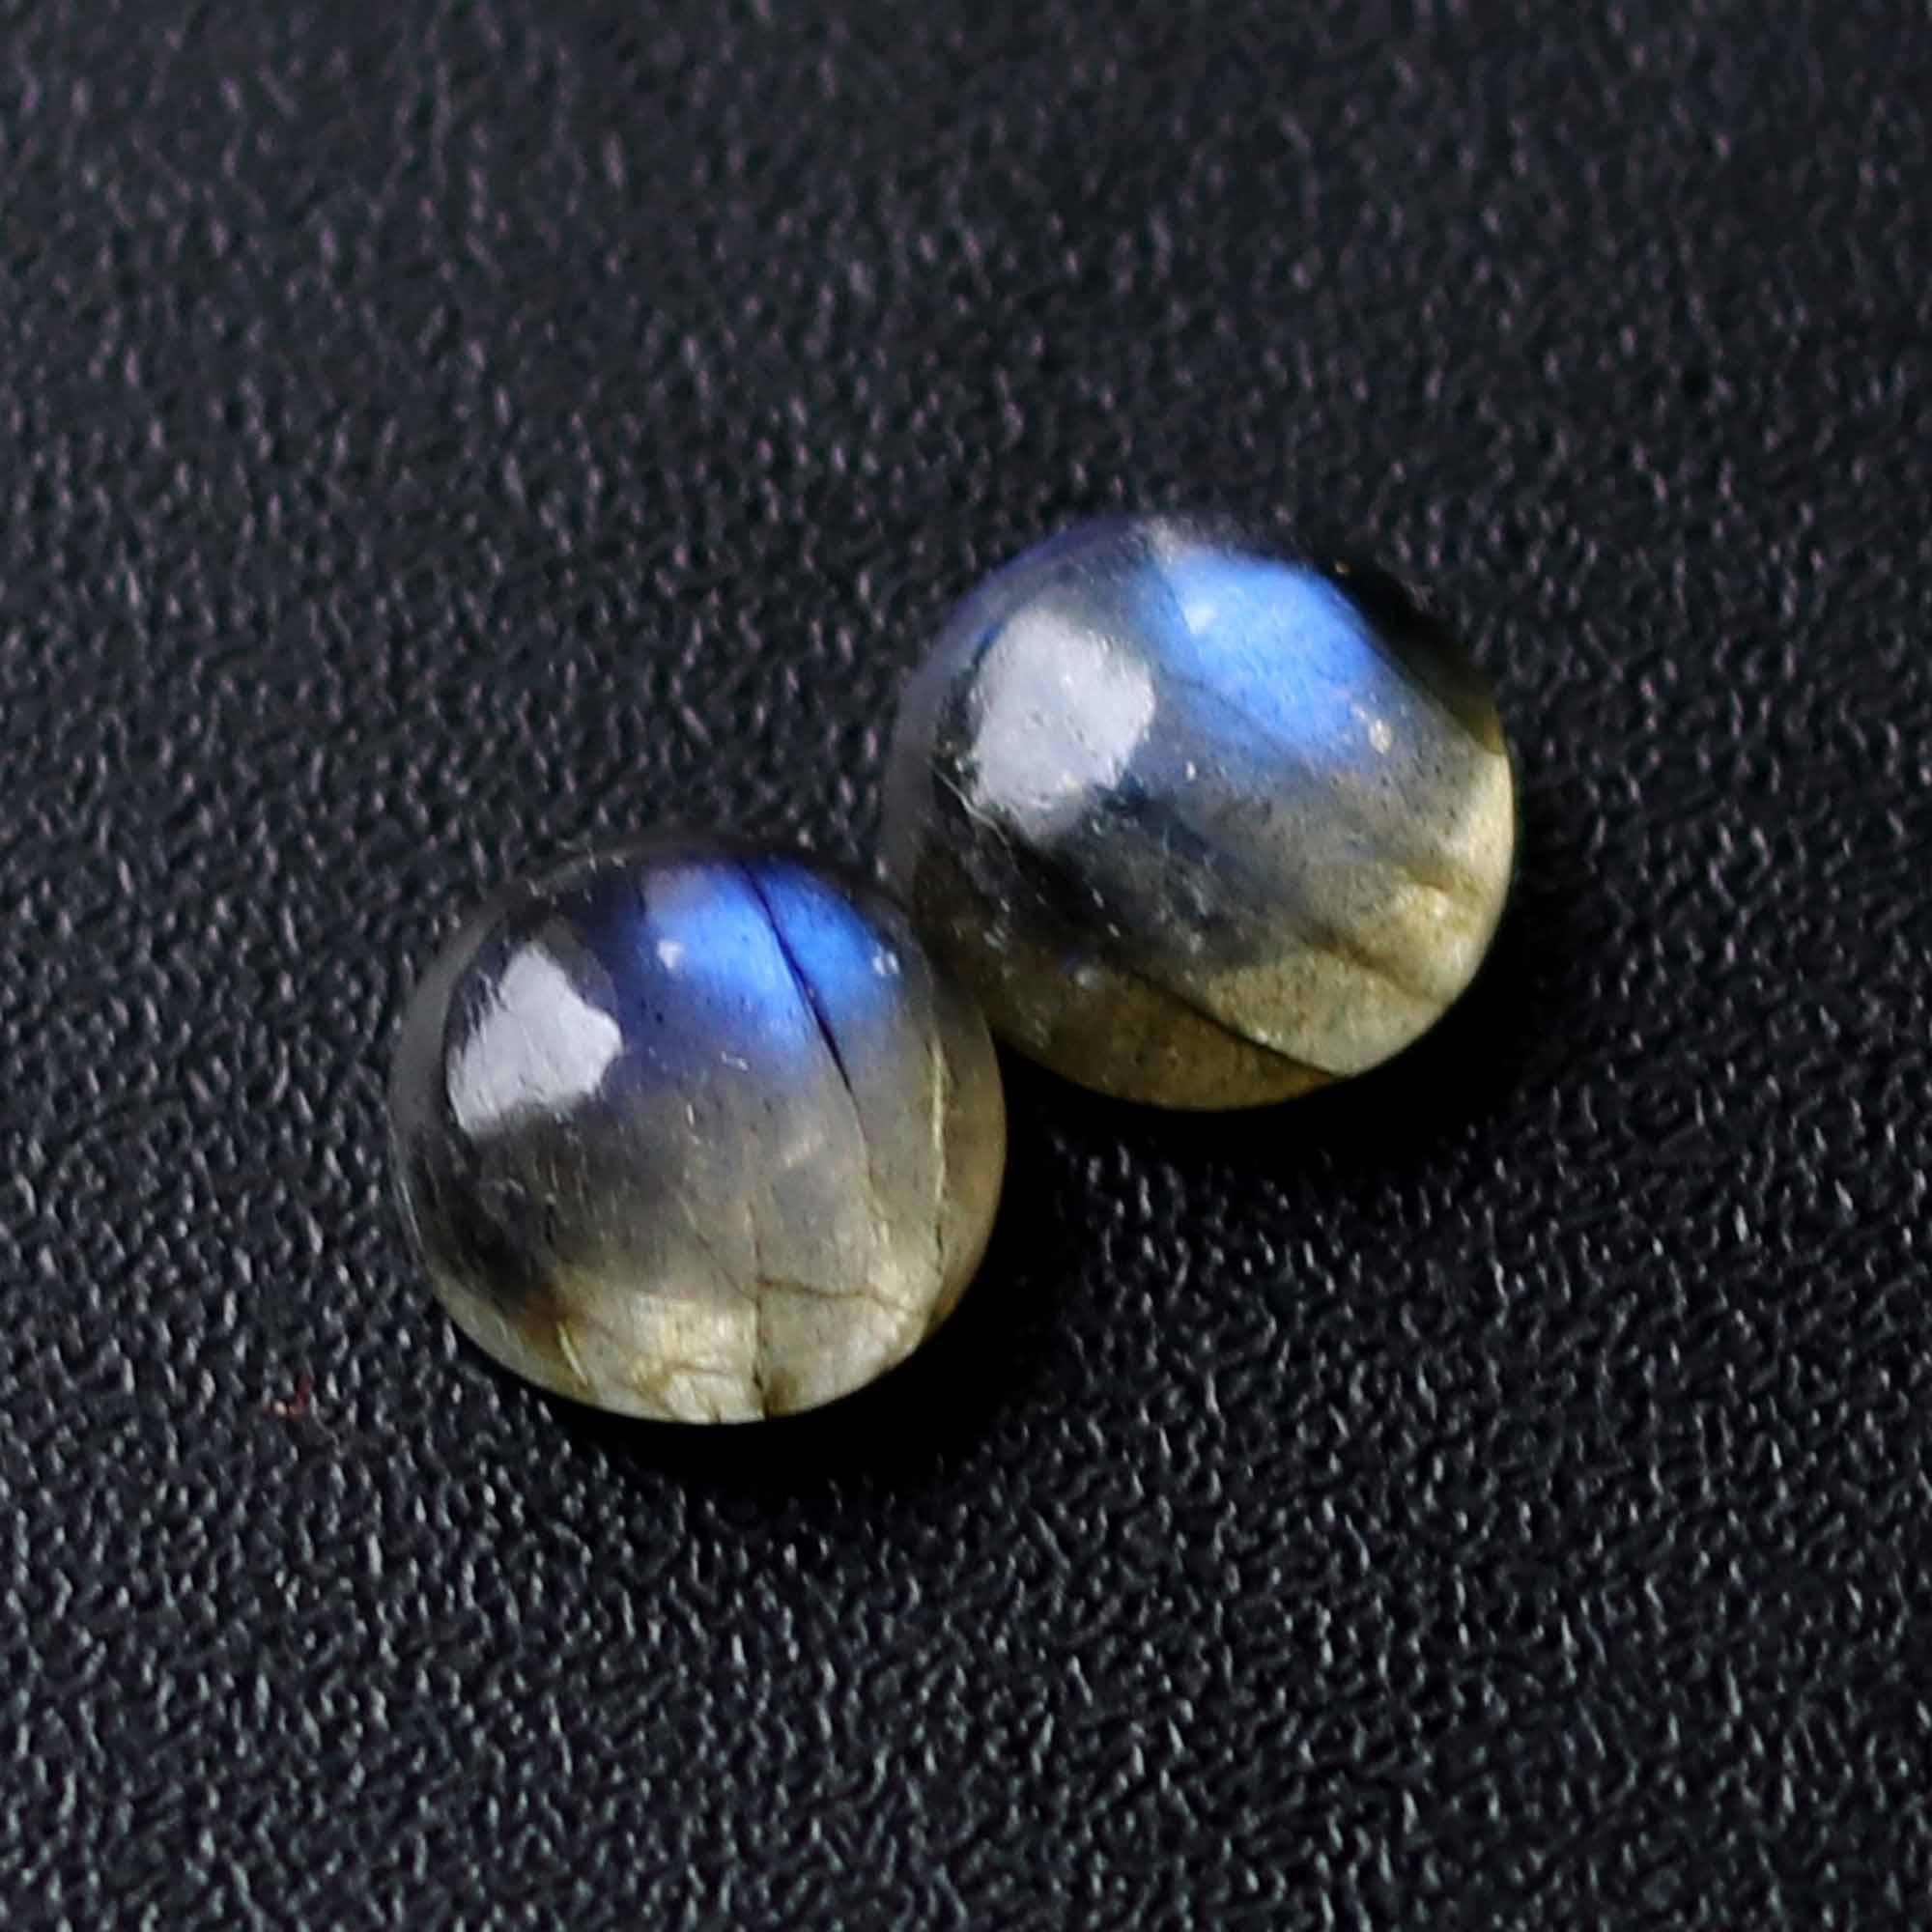 High Grade Rainbow Moonstone Gemstone Cabochon,Approx Matching Pair Awesome Beautiful Blue Flashy,Oval Shape,Size12x10MM Calibrated,12.00Cts